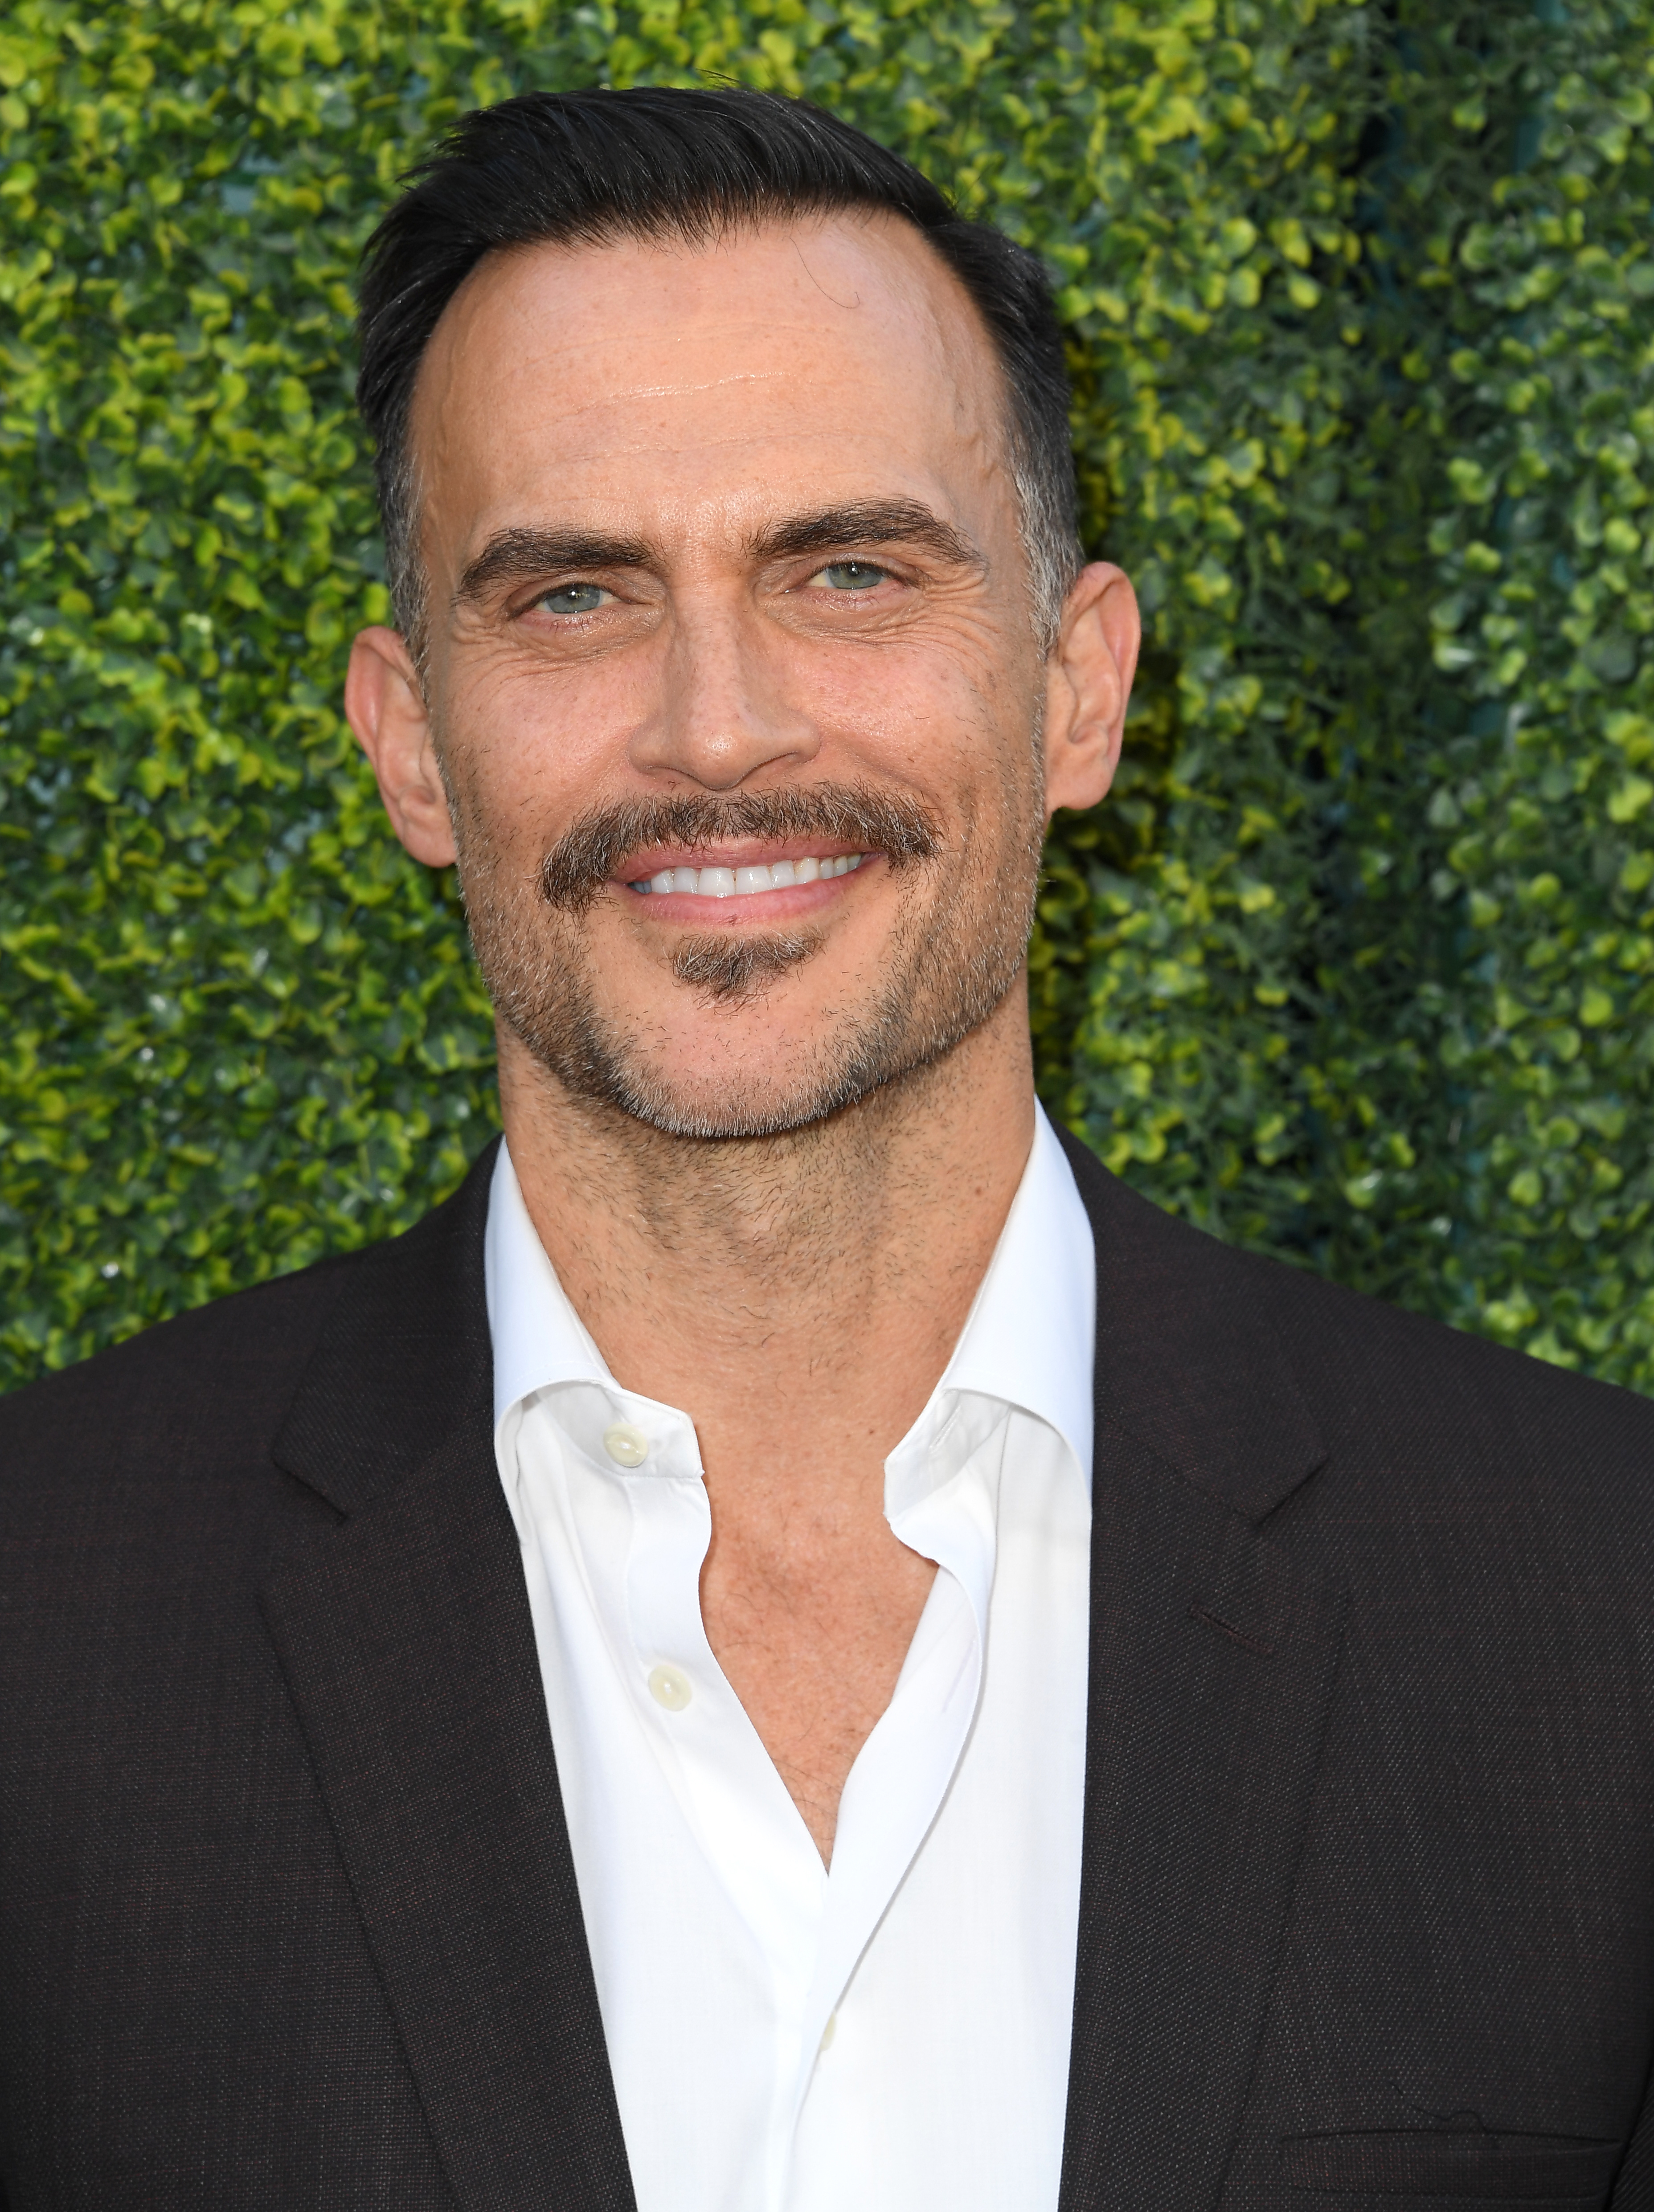 Cheyenne Jackson at The 2022 CORE Gala on June 10, 2022, in Los Angeles, California. | Source: Getty Images